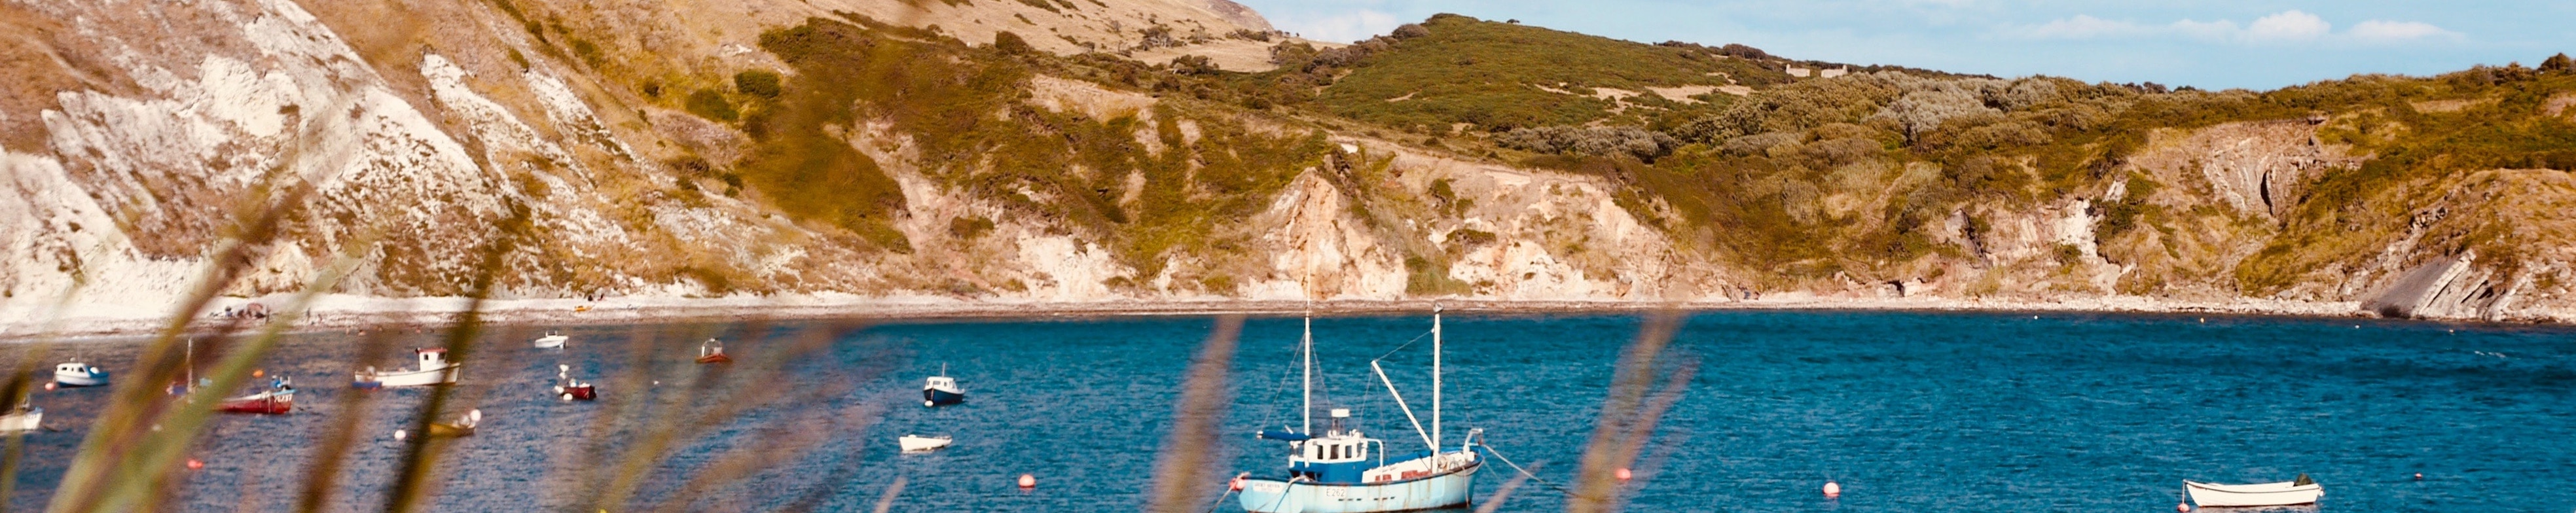 Stunning view from Lulworth Cove with Boats on the Sea